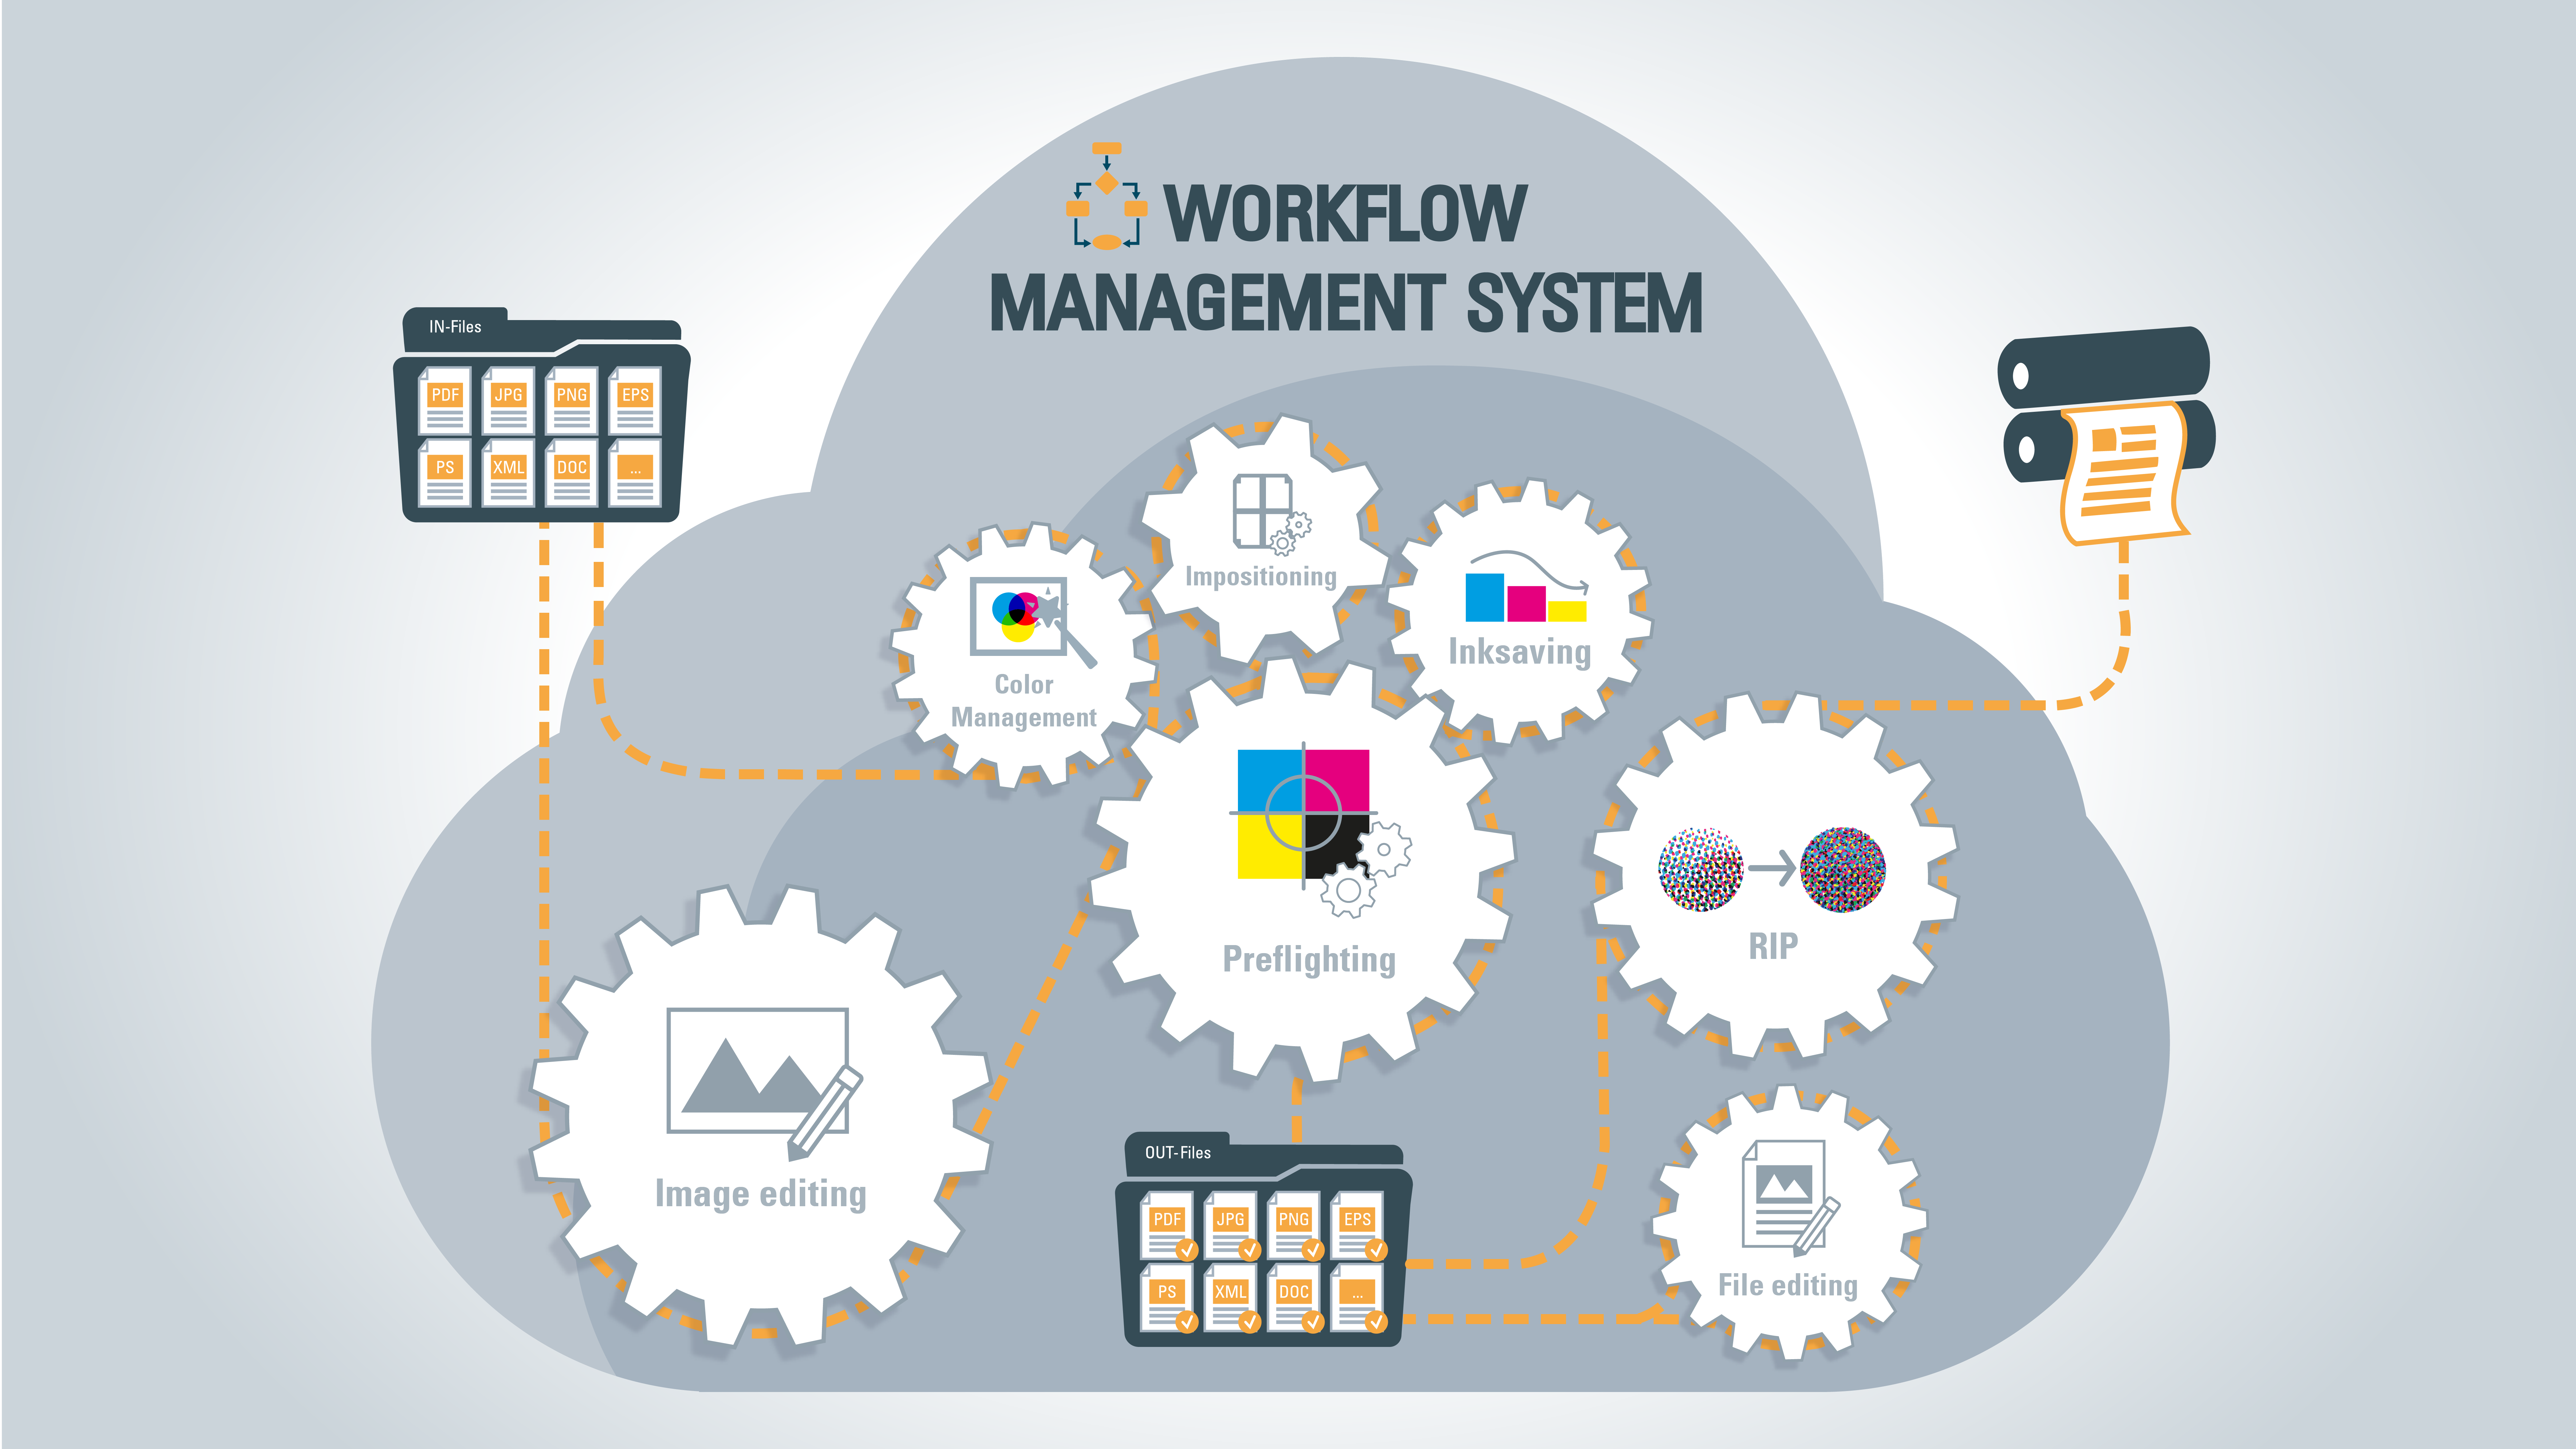 More productivity and effectiveness with Workflow Management Systems